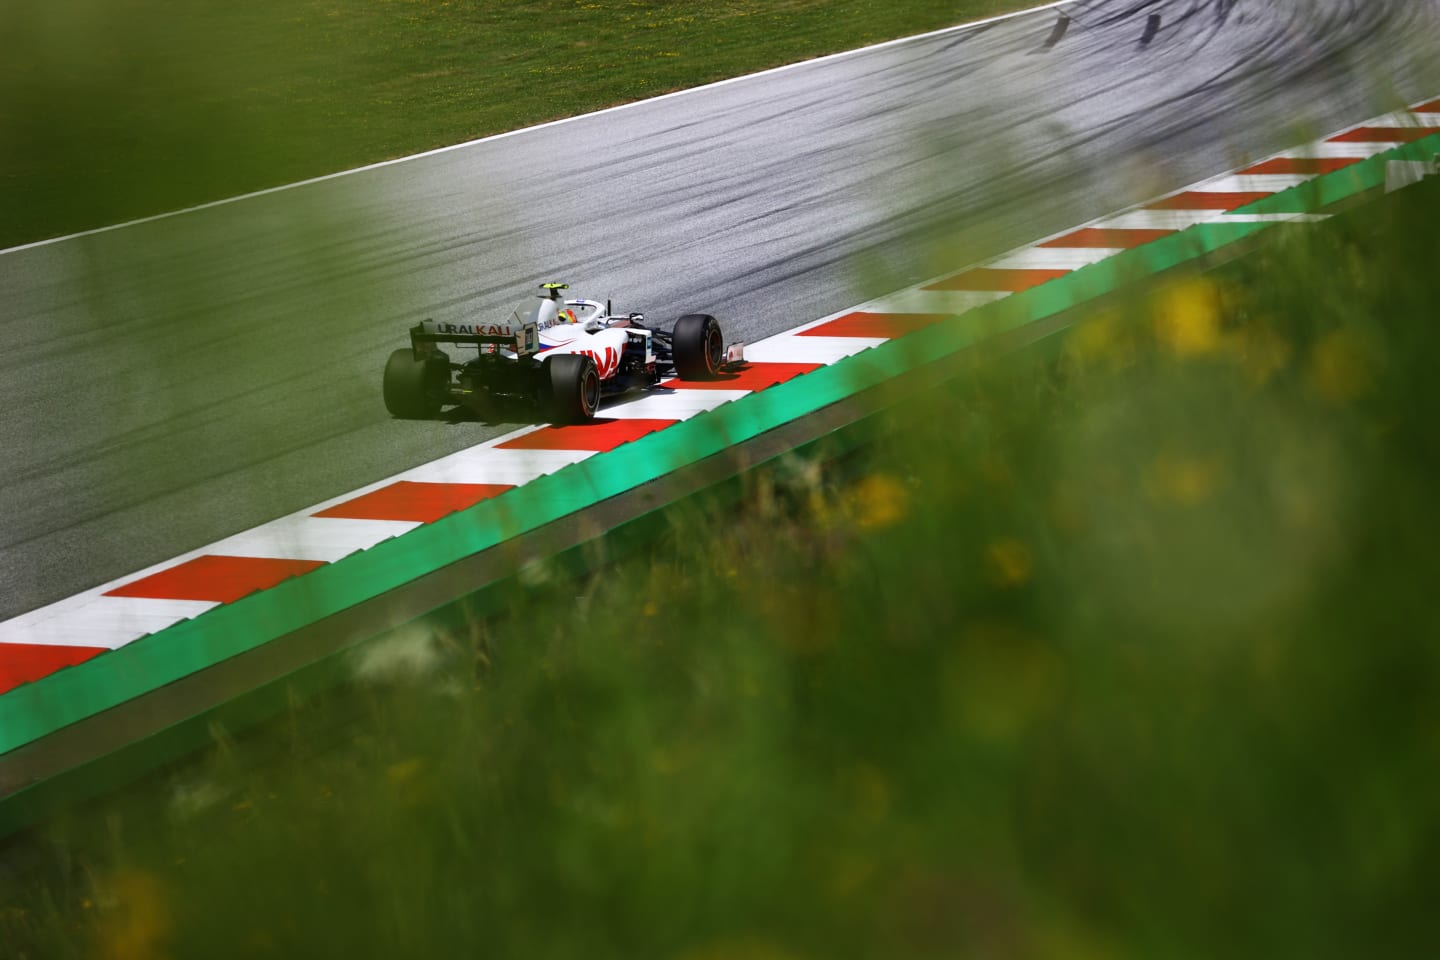 SPIELBERG, AUSTRIA - JUNE 26: Mick Schumacher of Germany driving the (47) Haas F1 Team VF-21 Ferrari on track during final practice ahead of the F1 Grand Prix of Styria at Red Bull Ring on June 26, 2021 in Spielberg, Austria. (Photo by Bryn Lennon/Getty Images)